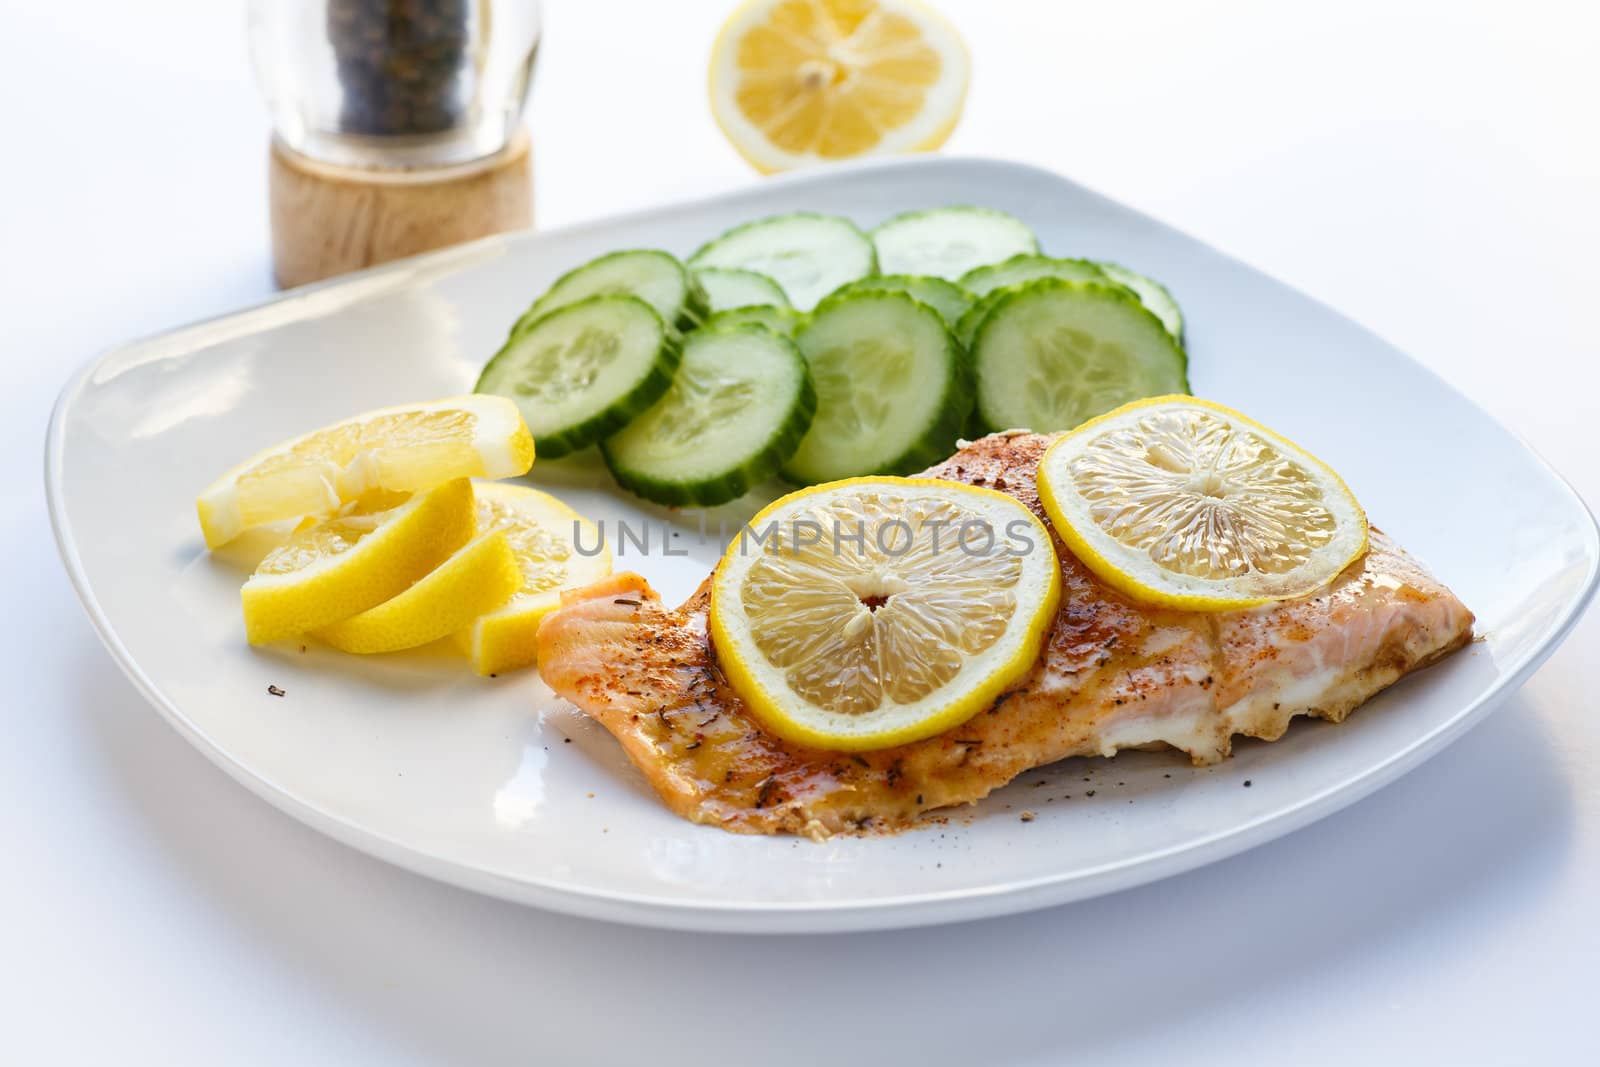 Baked Salmon with Sliced Lemons and Cucumbers by dbvirago